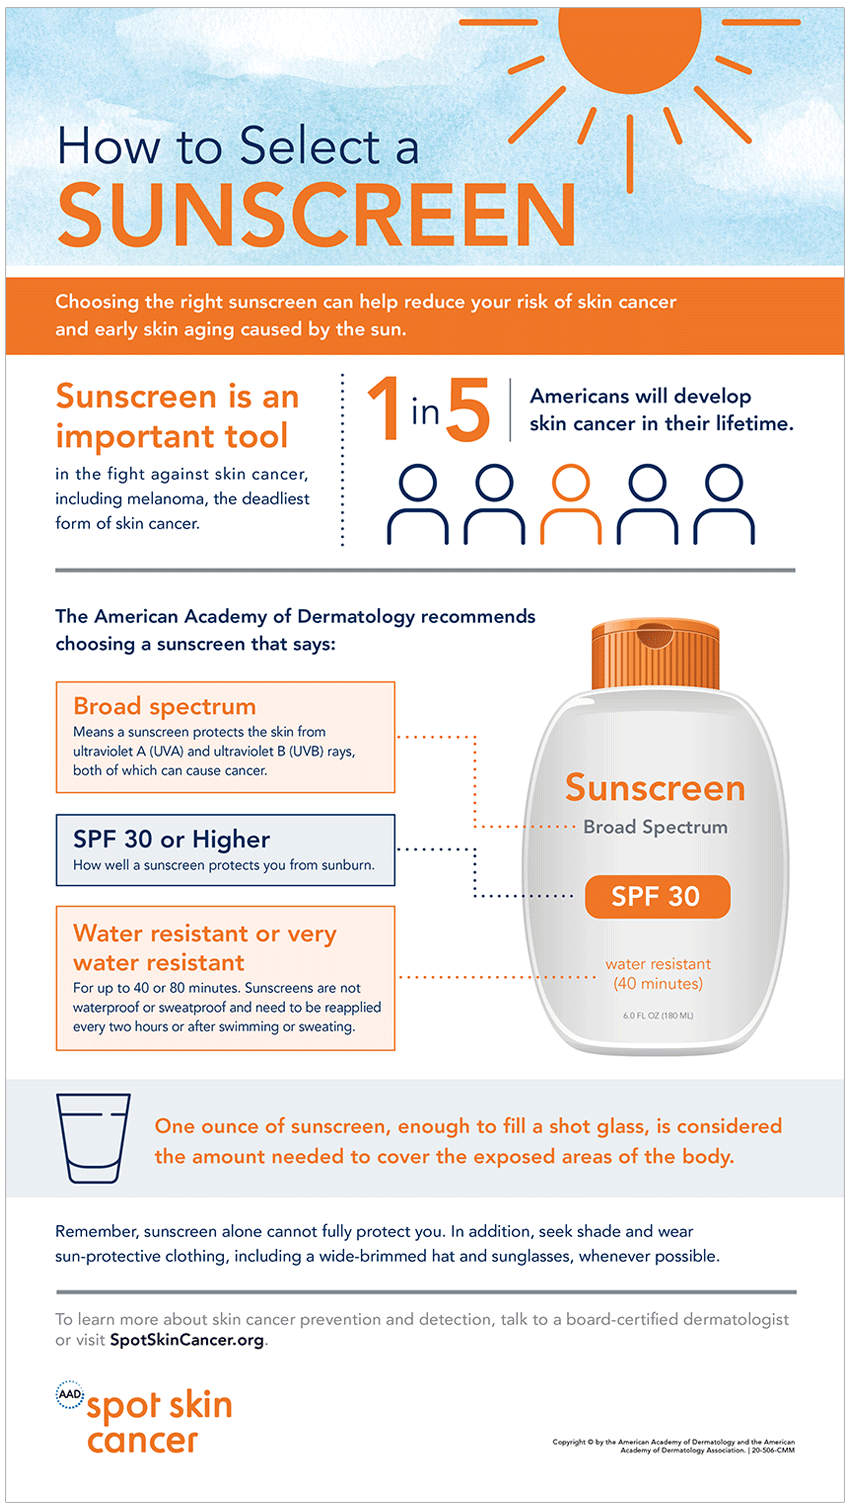 How to select sunscreen infographic